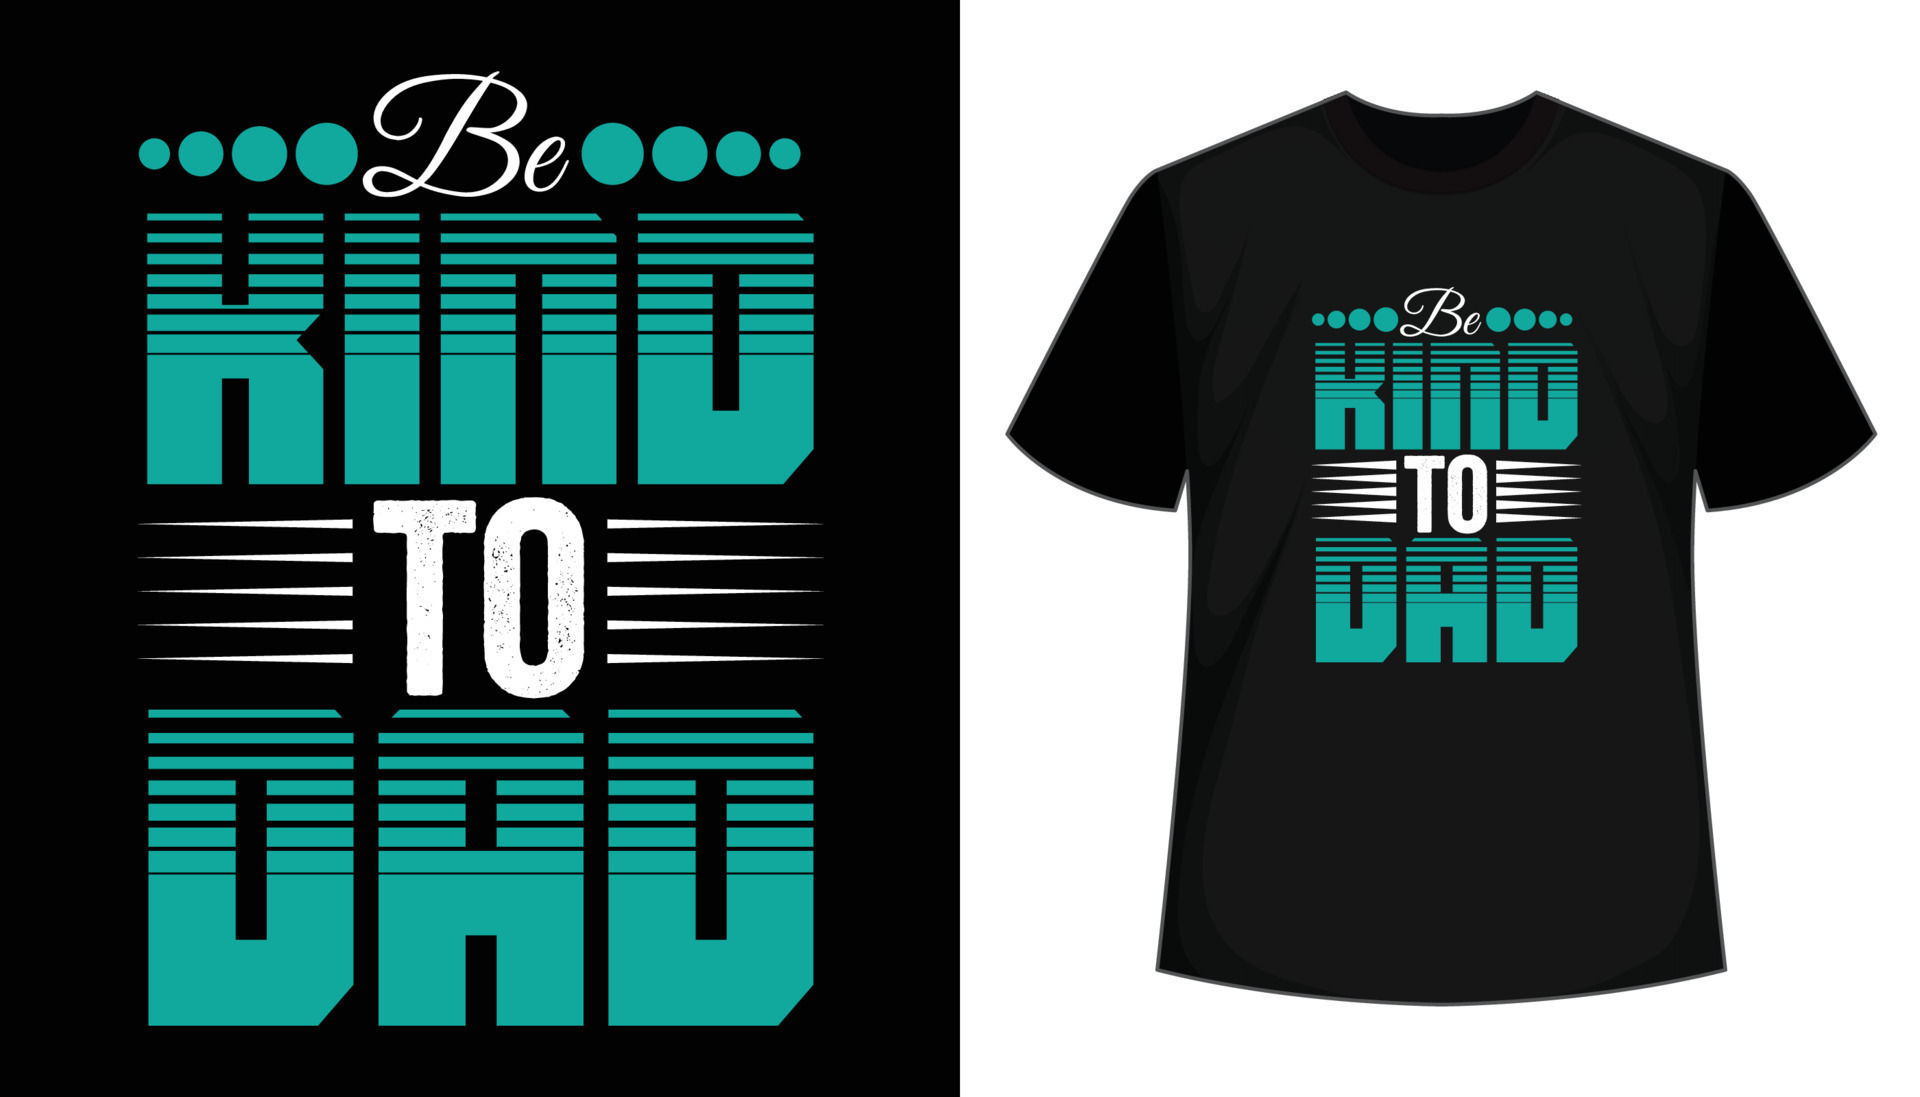 Be kind to dad typography t shirt design. vector illustration 8324670 ...